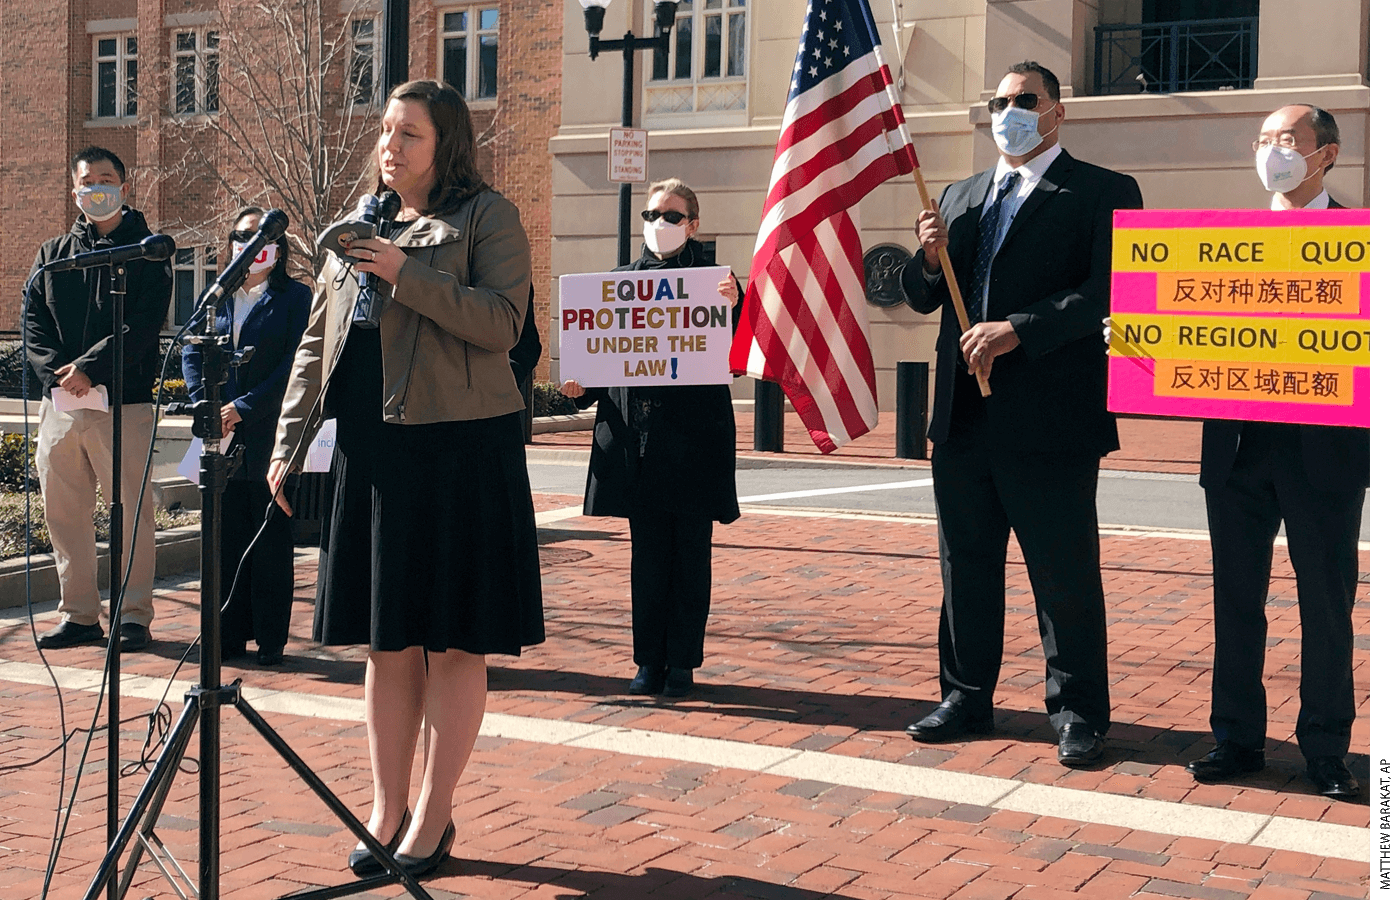 Pacific Legal Foundation attorney Erin Wilcox, pictured here at the microphone, filed a lawsuit against the Fairfax County School Board, alleging anti-Asian discrimination.